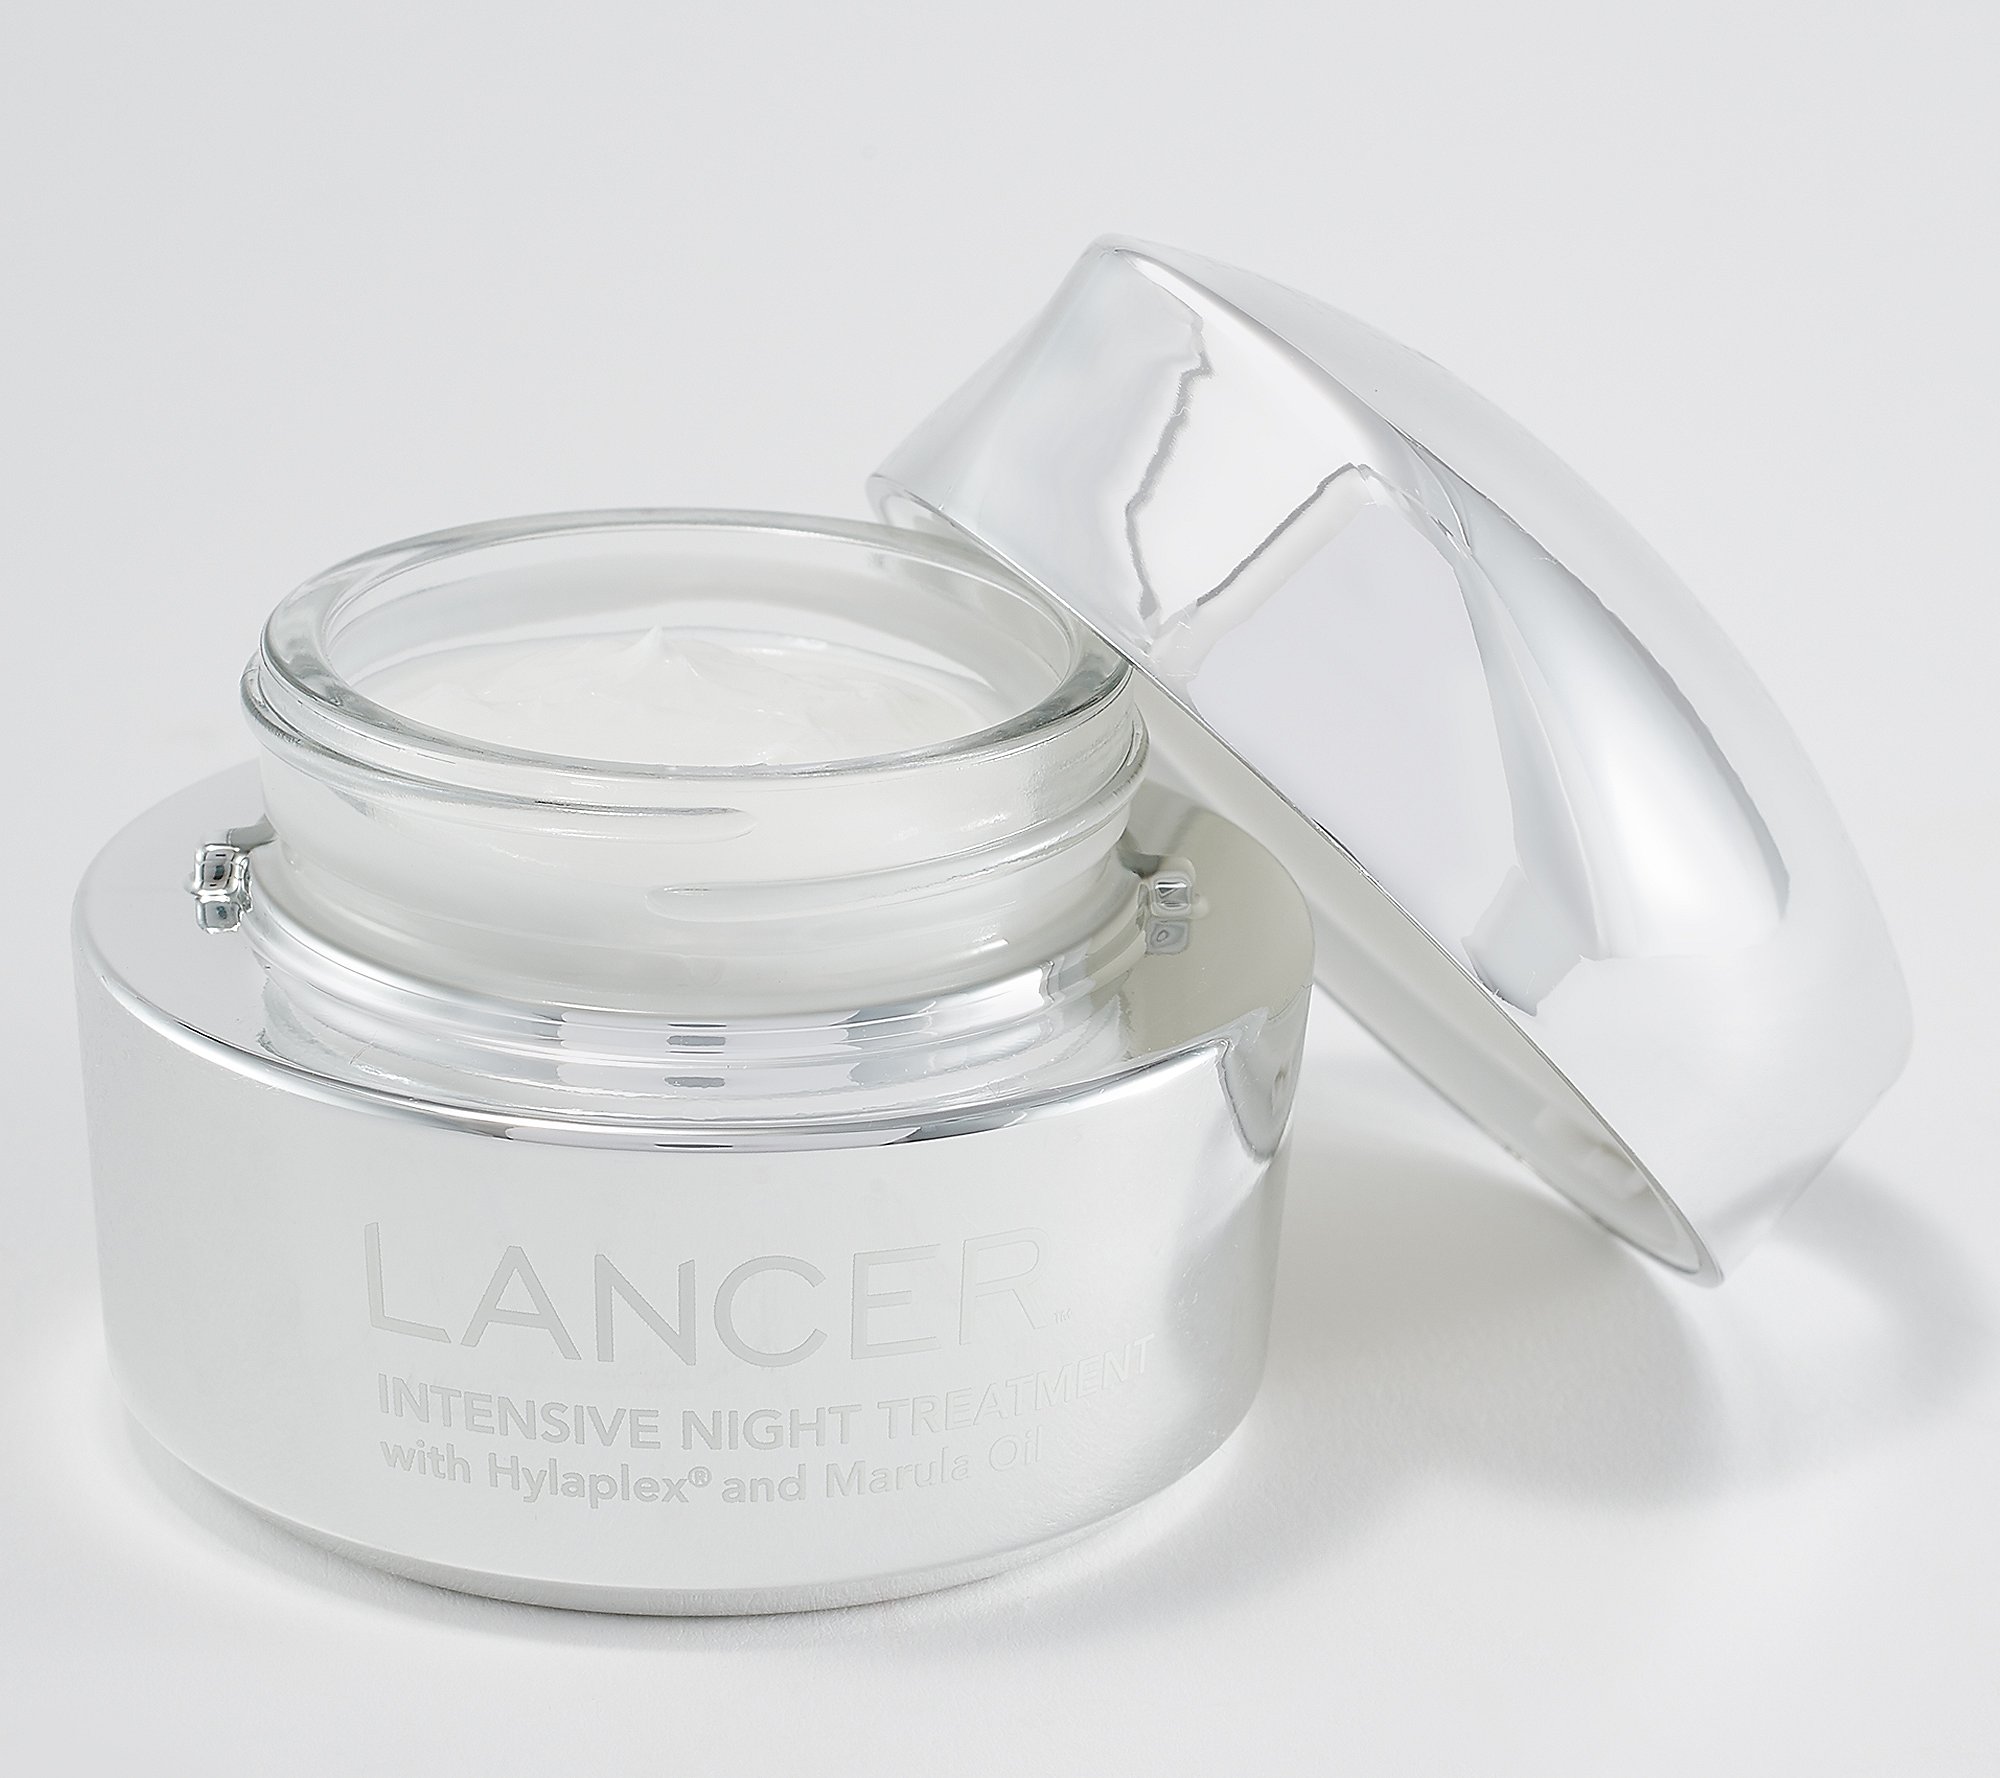 A-D Lancer Intensive Night Treatment 1.7-ozAuto-Delivery